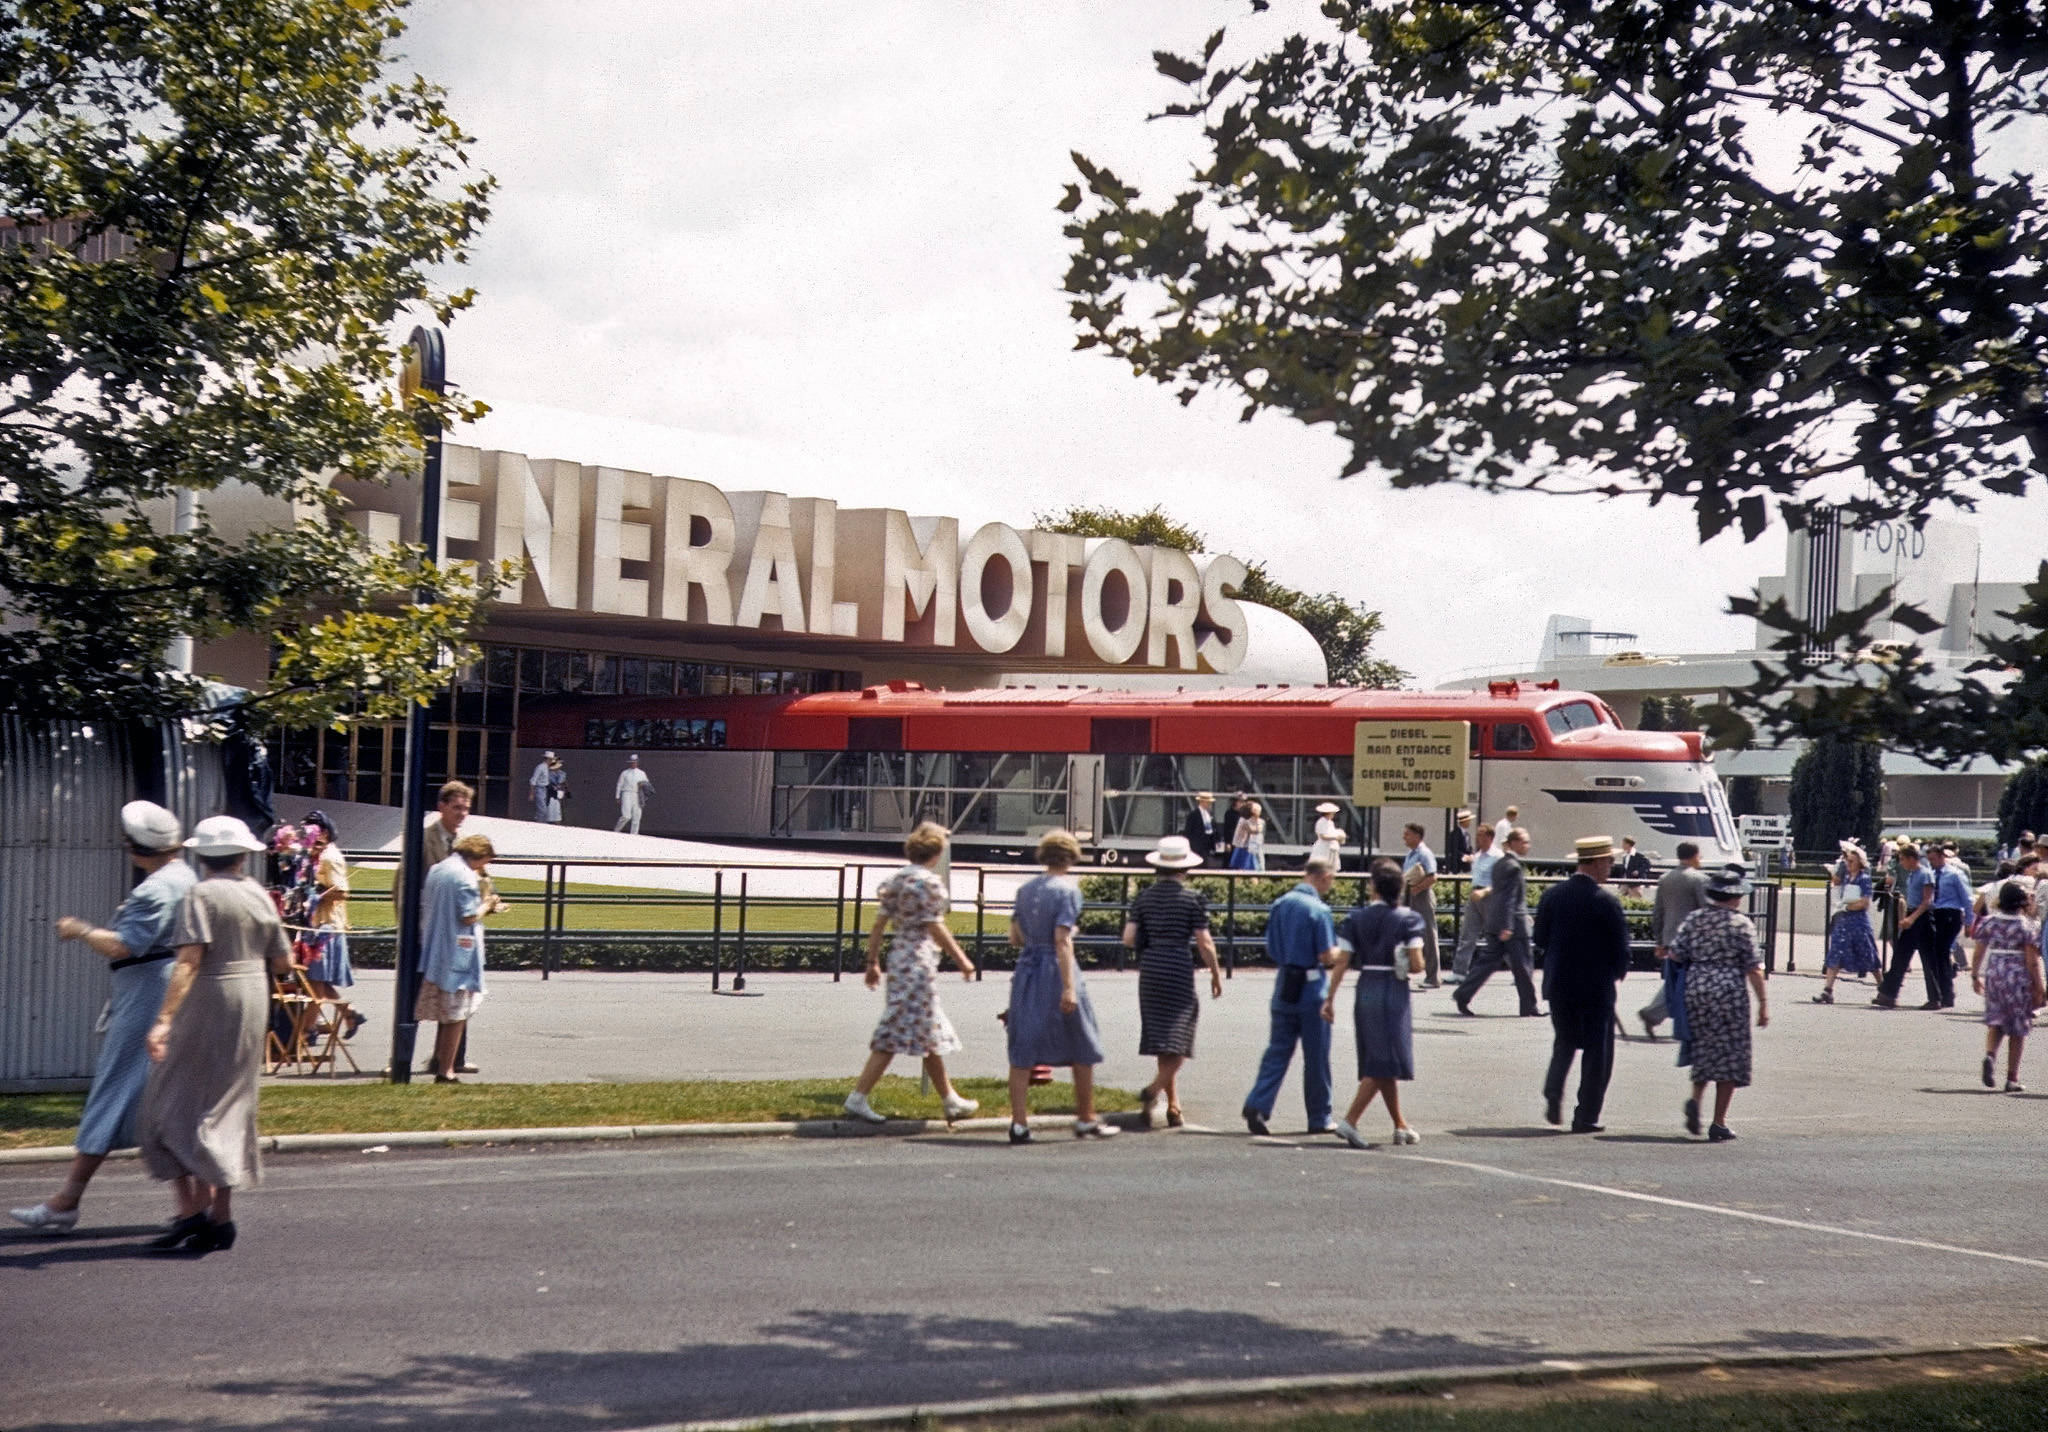 The General Motors Pavilion at the New York World's Fair in 1940. One of a series of Kodachromes taken by my great-grandfather, who was a photofinisher in Washington, D.C. View full size.